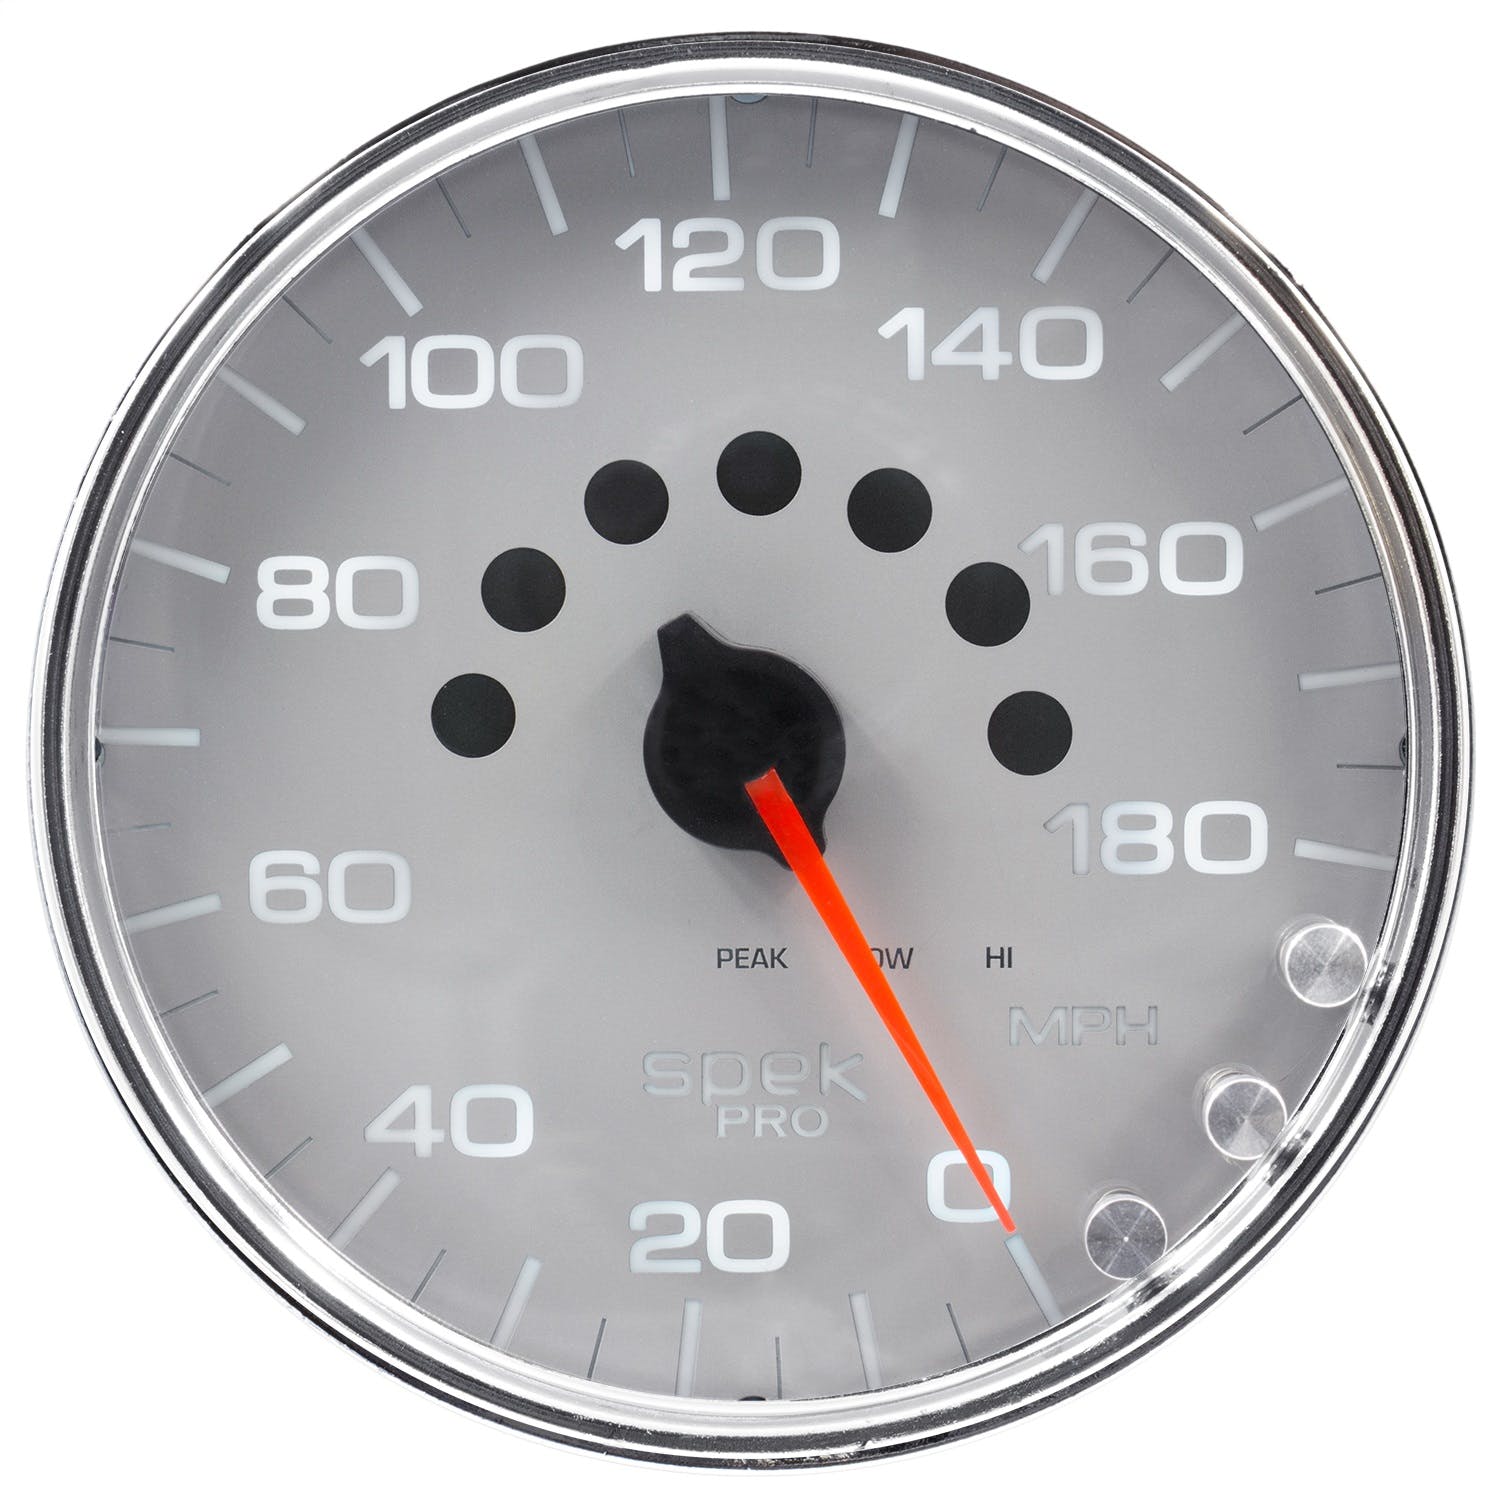 AutoMeter Products P23021 Spek Pro Speedometer Gauge, Electric Programmable Silver/Chrome 5, 180 MPH